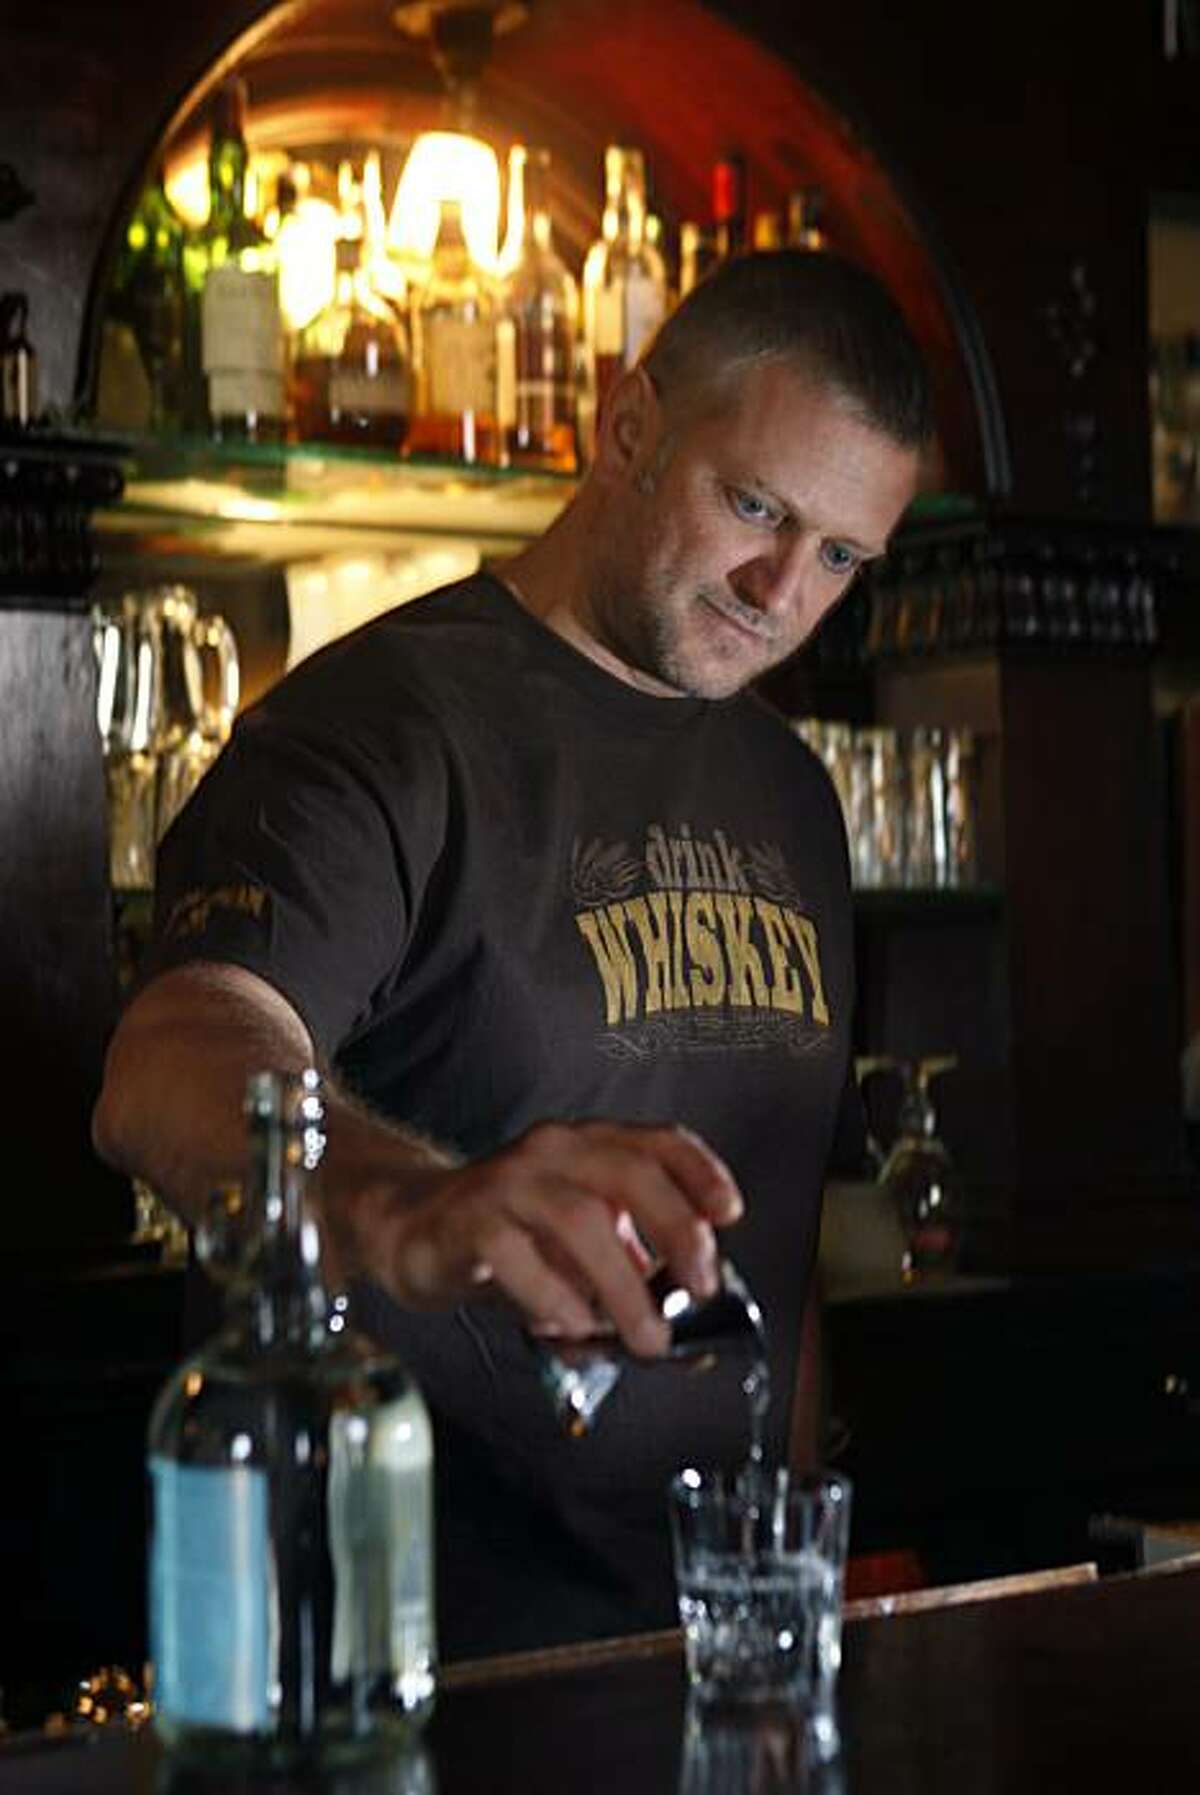 Elixir offers several moonshine including Marco K. Spirits' Doubled & Twisted IPA Whiskey Light which bar owner H. Joseph Ehrmann is pouring on Wednesday, February 10, 2010, in San Francisco, Ca.